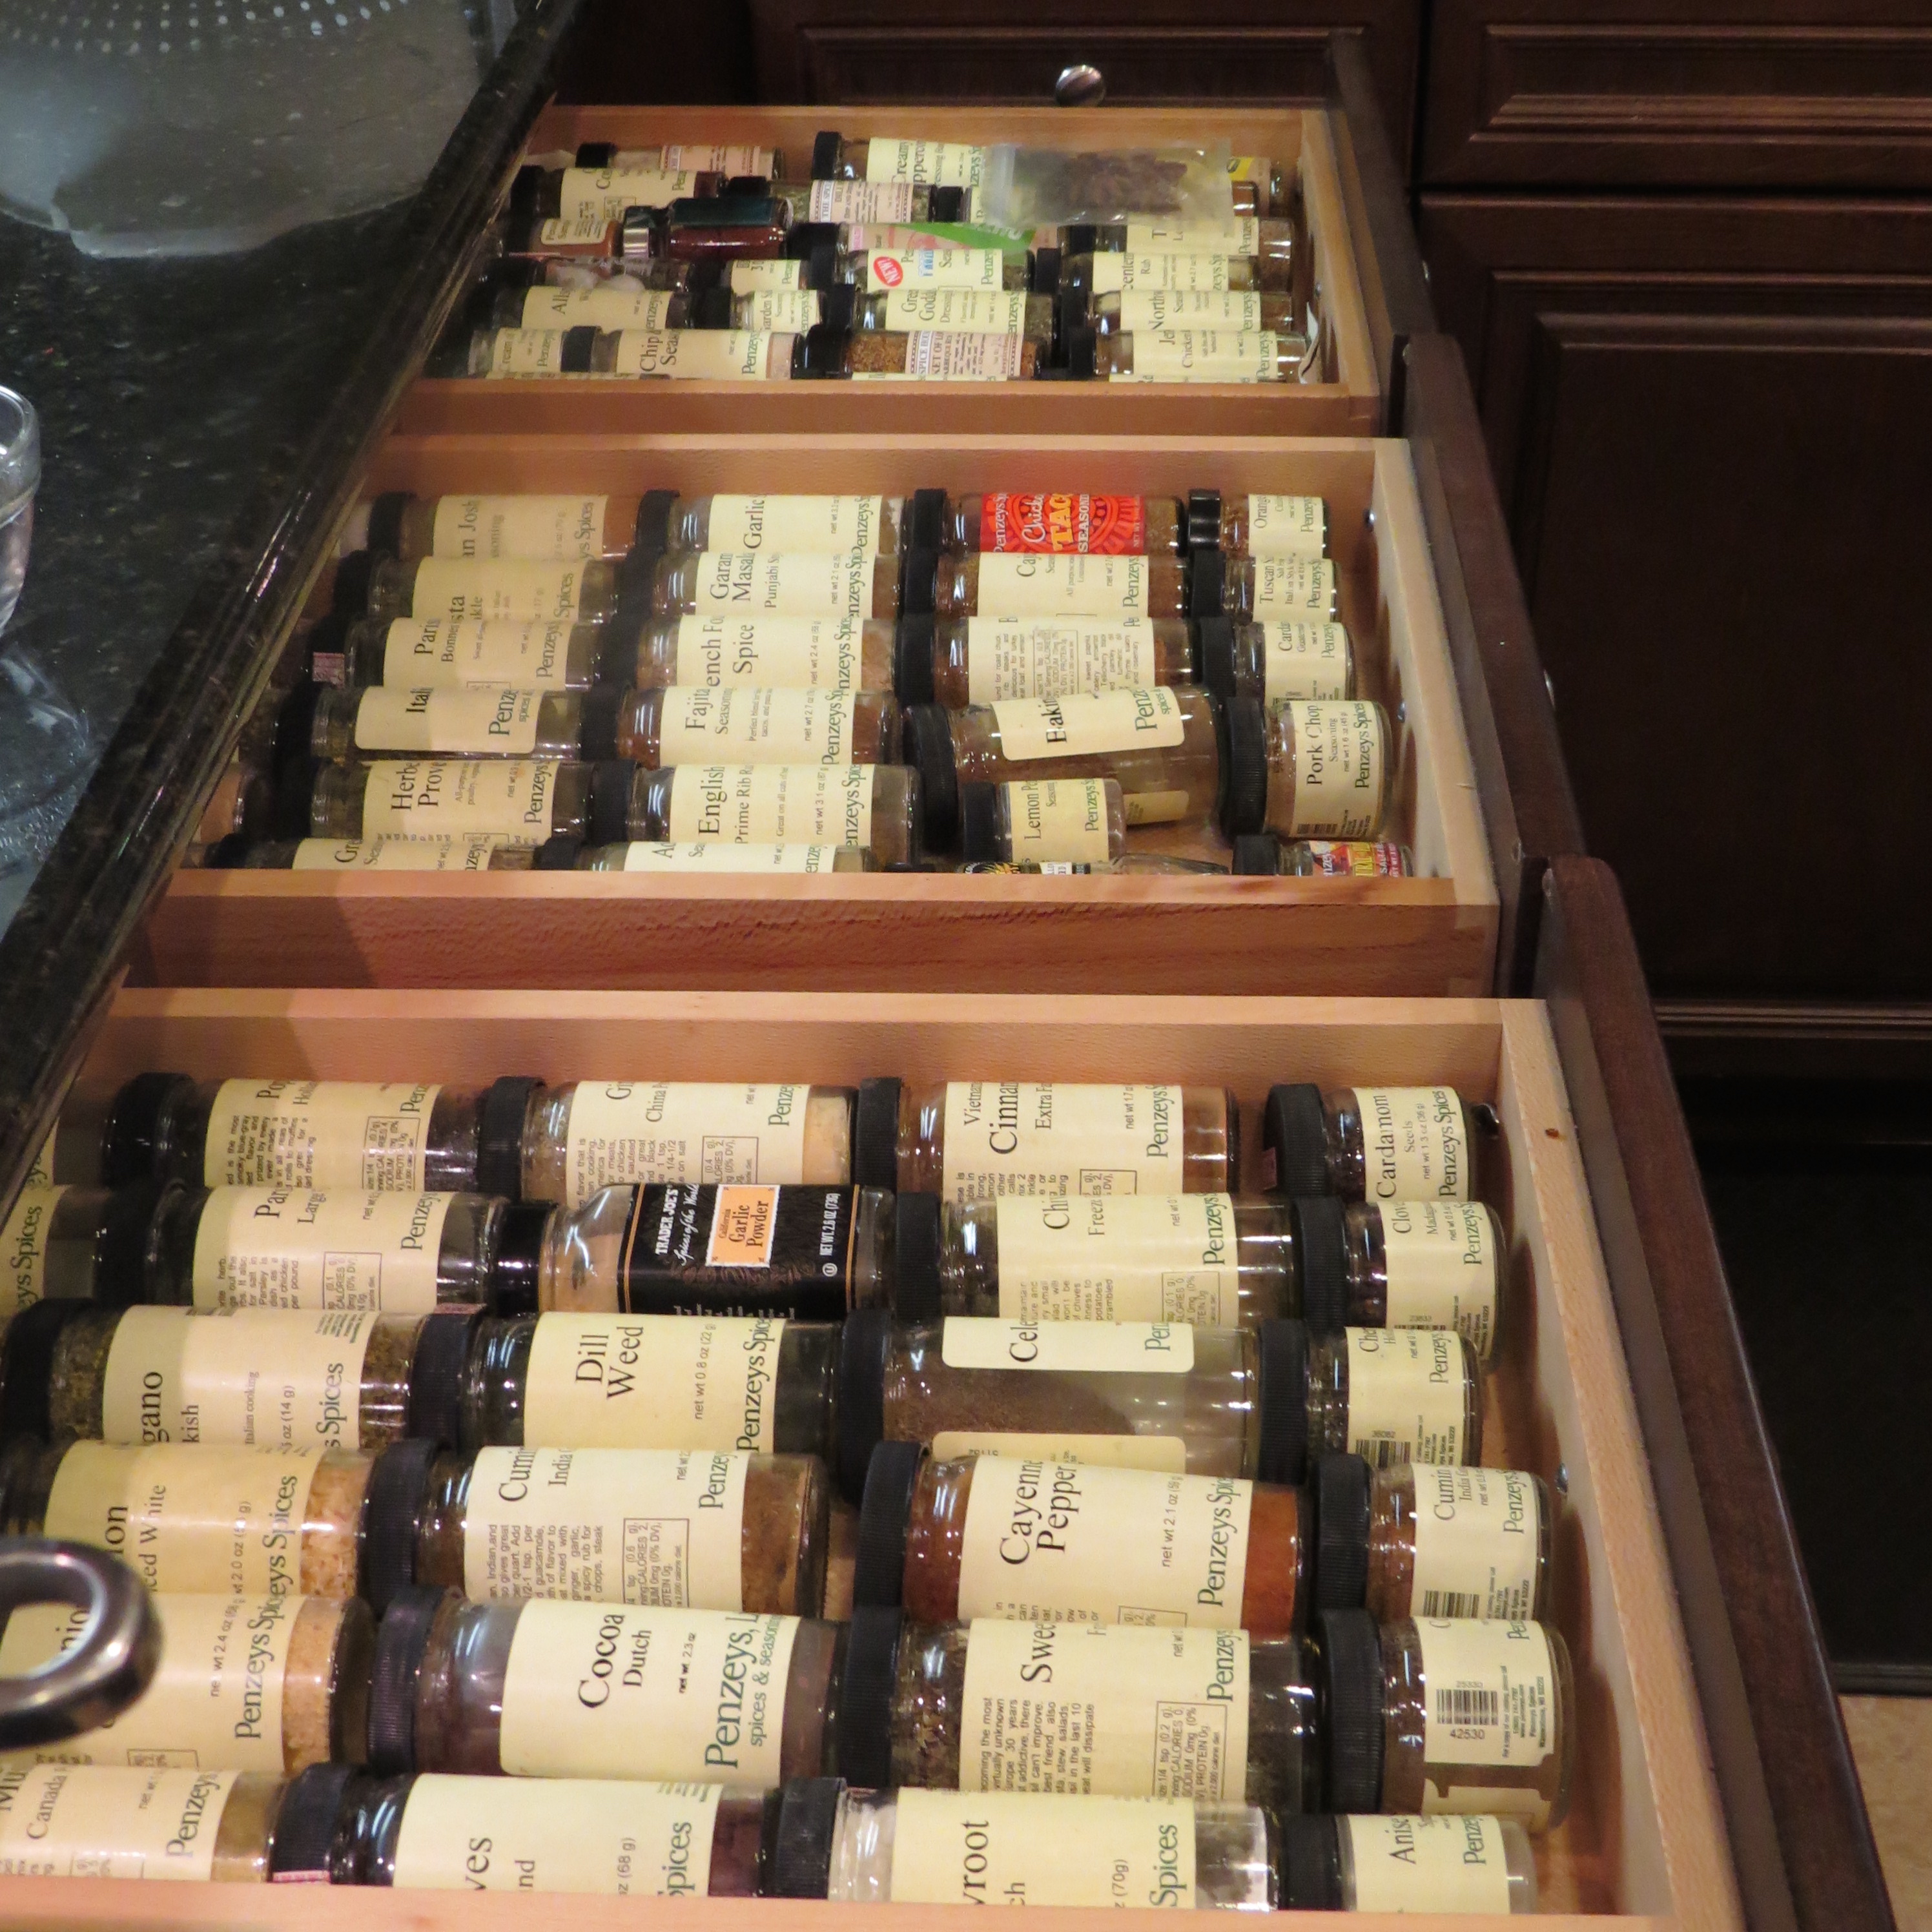 Spice Envy: Susan and John's Inventory.